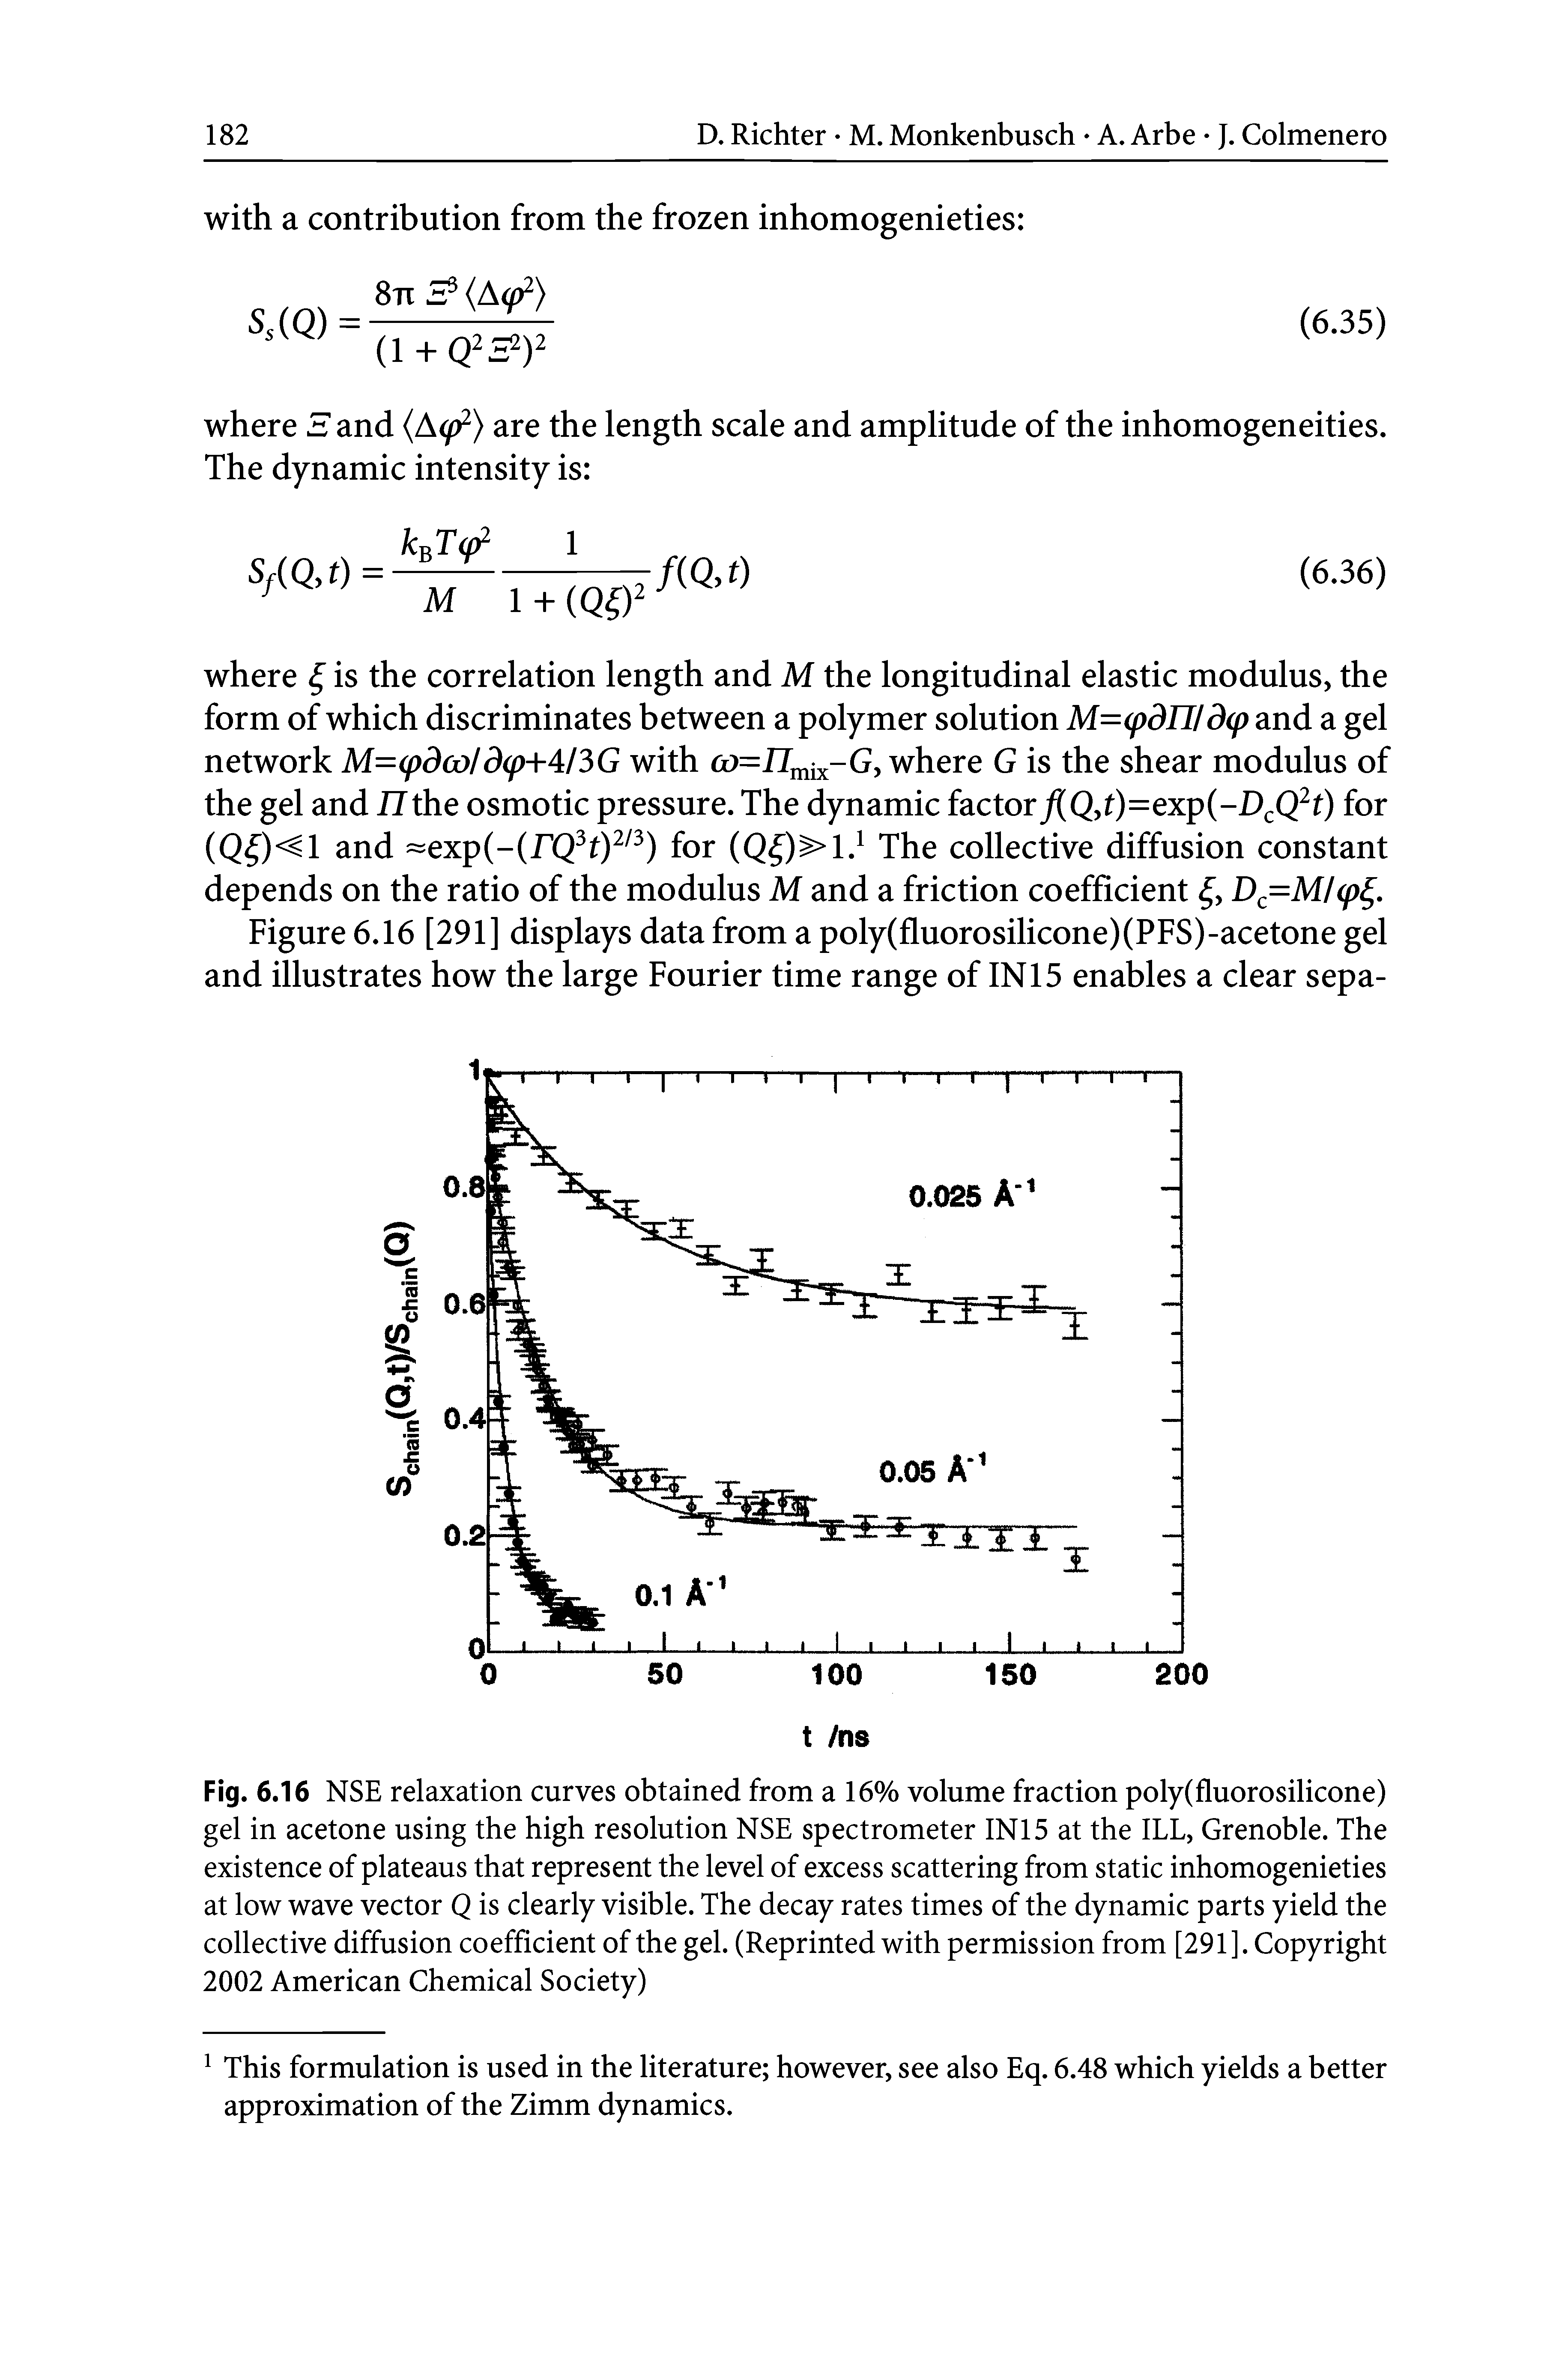 Fig. 6.16 NSE relaxation curves obtained from a 16% volume fraction poly(fluorosilicone) gel in acetone using tbe bigb resolution NSE spectrometer INI5 at tbe ILL, Grenoble. Tbe existence of plateaus that represent tbe level of excess scattering from static inhomogenieties at low wave vector Q is clearly visible. Tbe decay rates times of tbe dynamic parts yield tbe collective diffusion coefficient of tbe gel. (Reprinted with permission from [291]. Copyright 2002 American Chemical Society)...